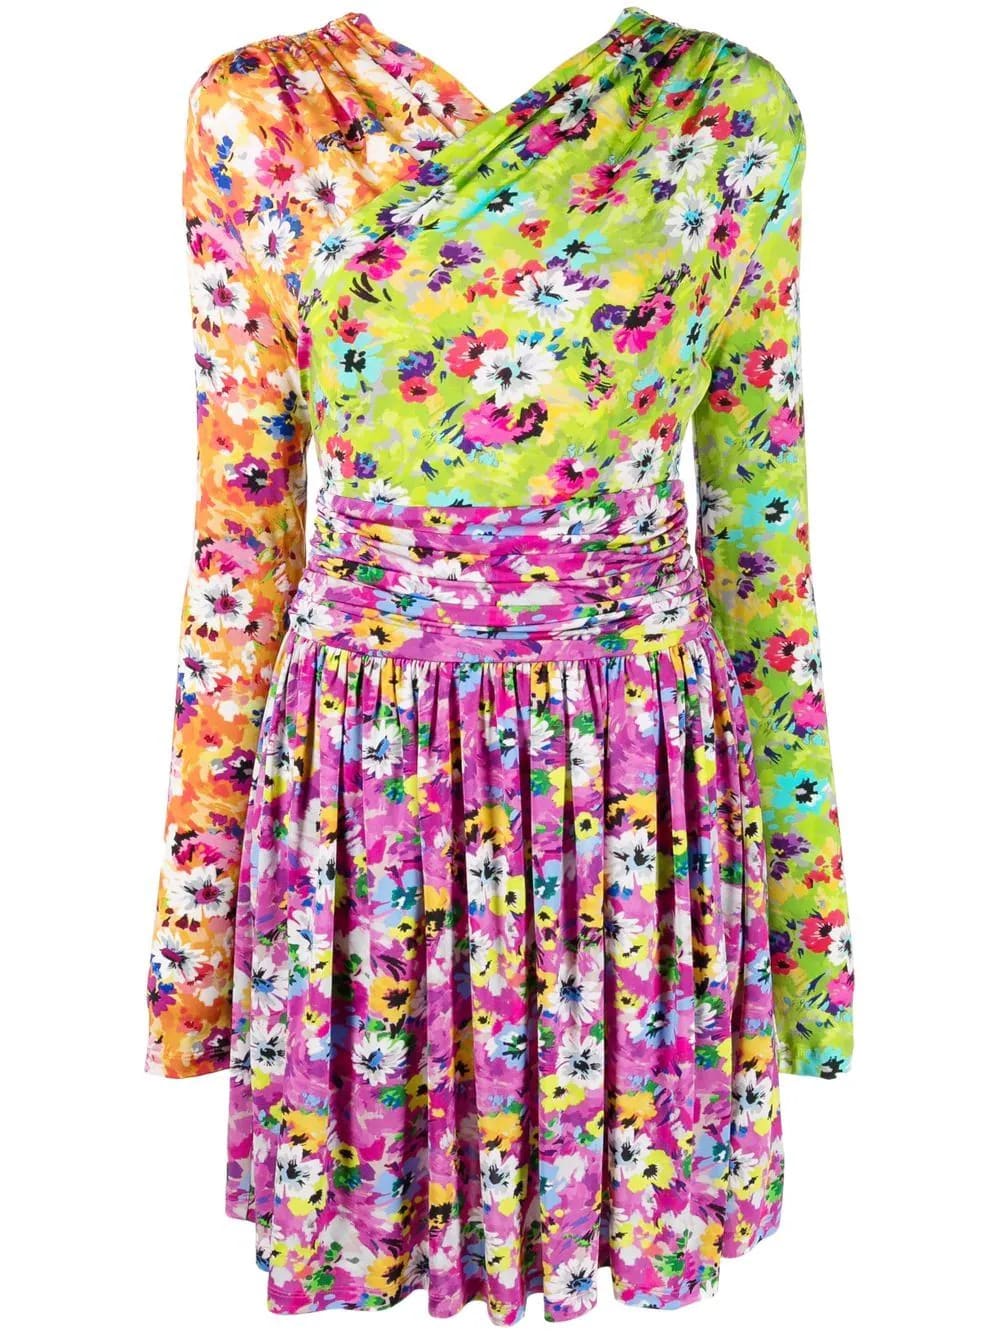 MSGM Woman Multicolored Floral Short Dress With Color Block Design